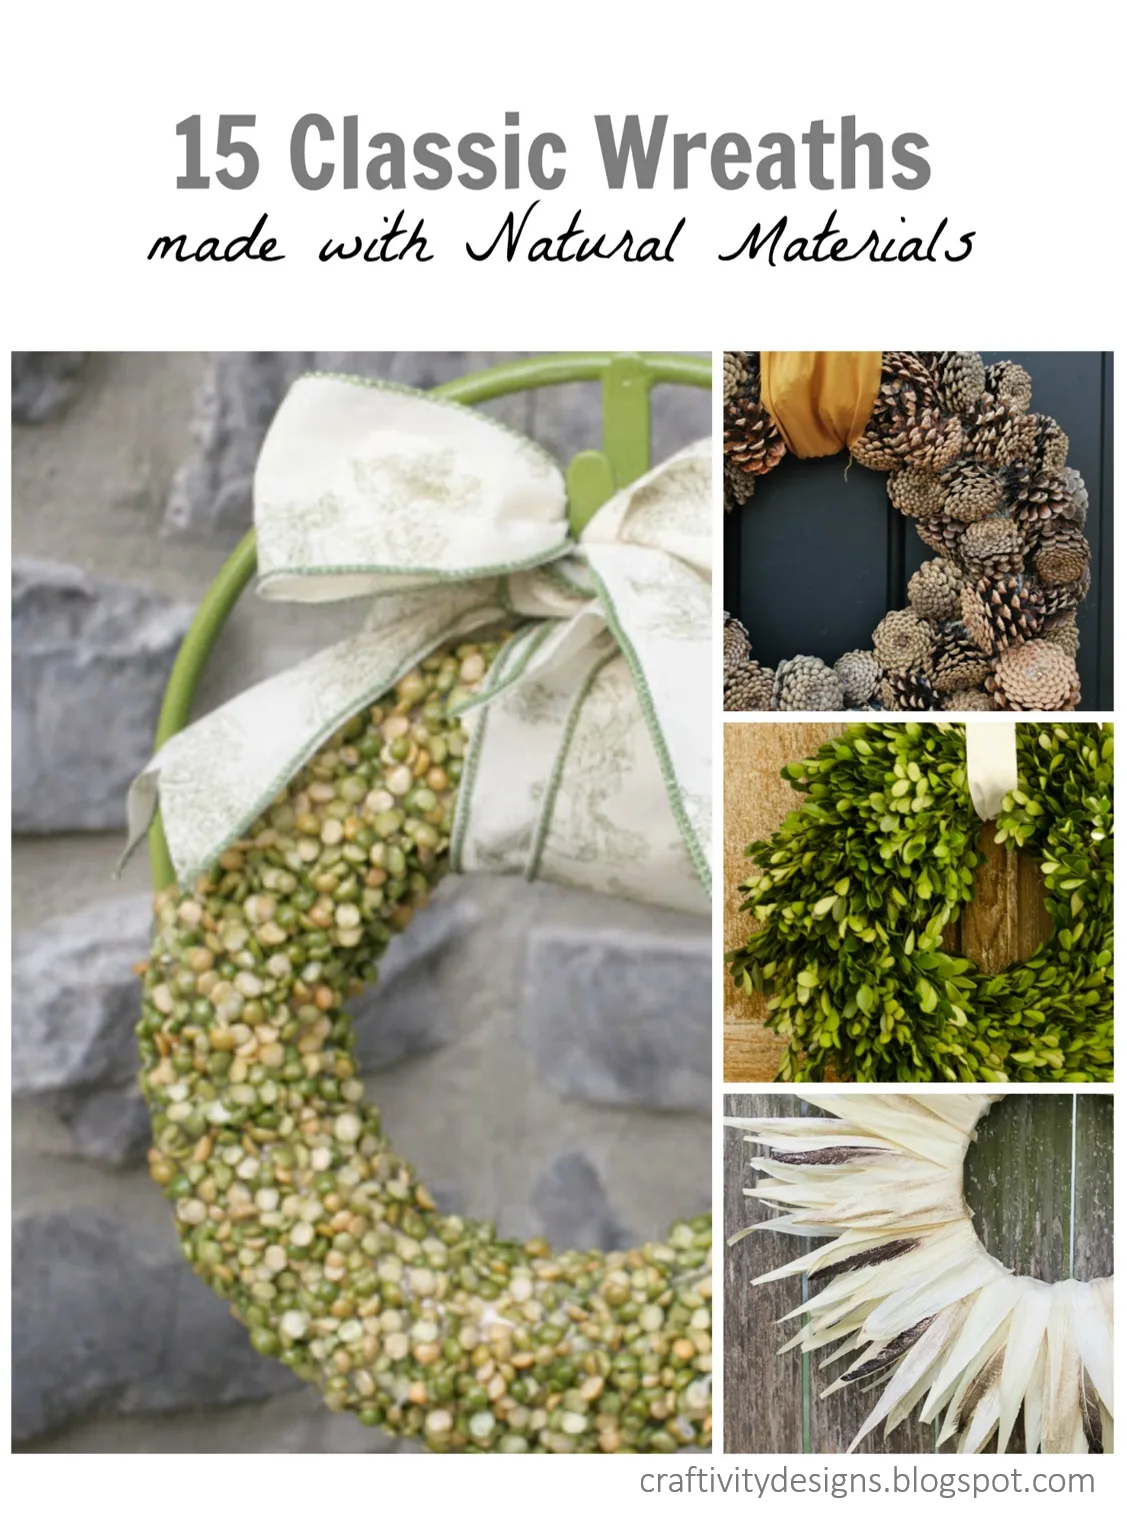 15 Classic Wreaths made with Natural Materials by @CraftivityD